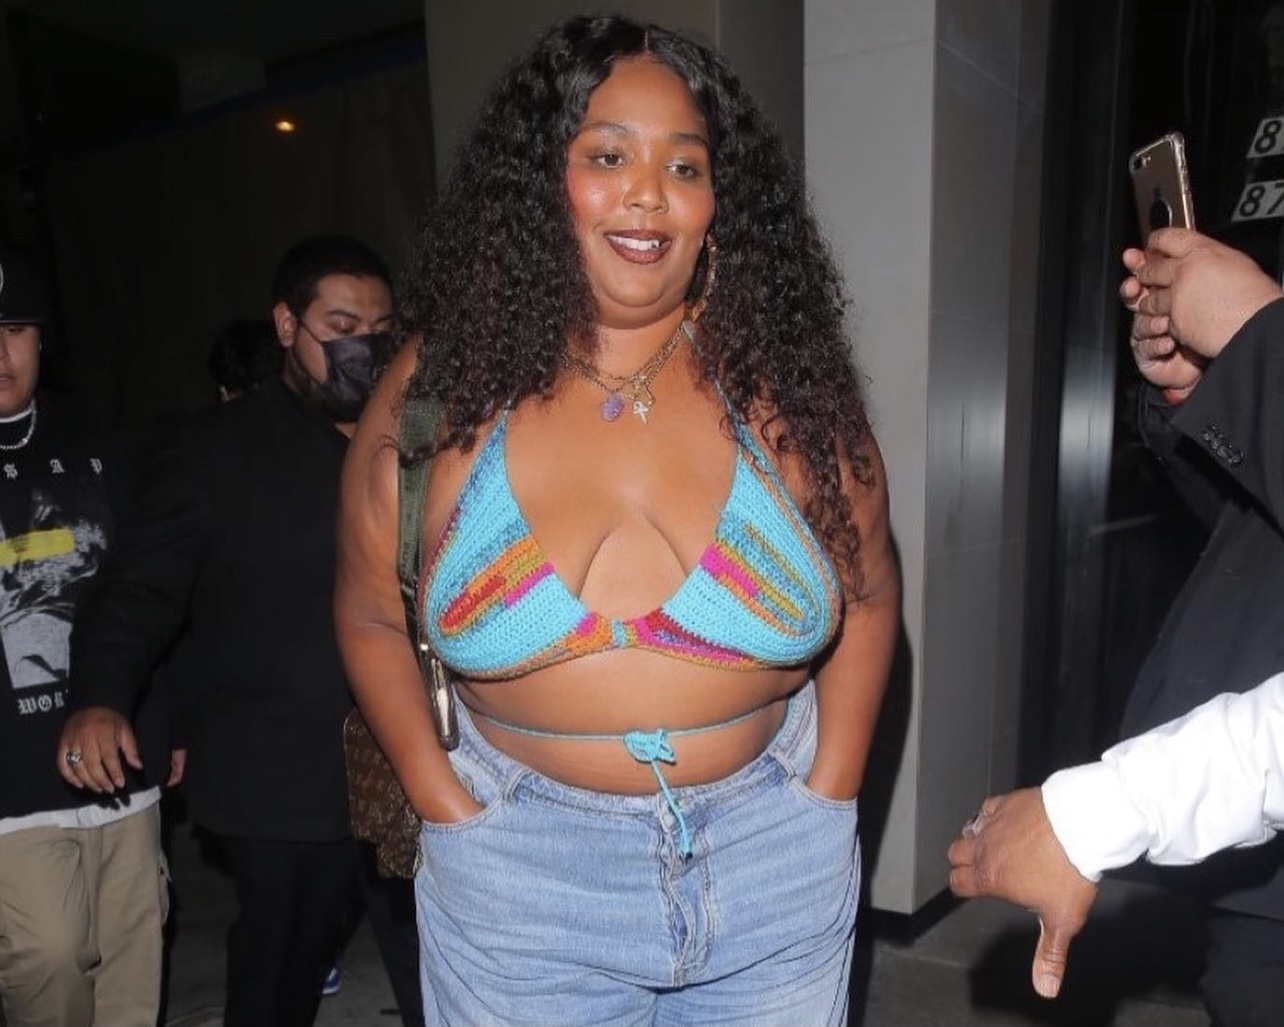 https://fashionbombdaily.com/wp-content/uploads/2021/05/Lizzo-Spotted-at-Catch-LA-Wearing-Knits-and-Pieces-Custom-Multicolor-Crochet-Bralette-Distressed-Jeans-and-Nike-Sneakers-.jpg